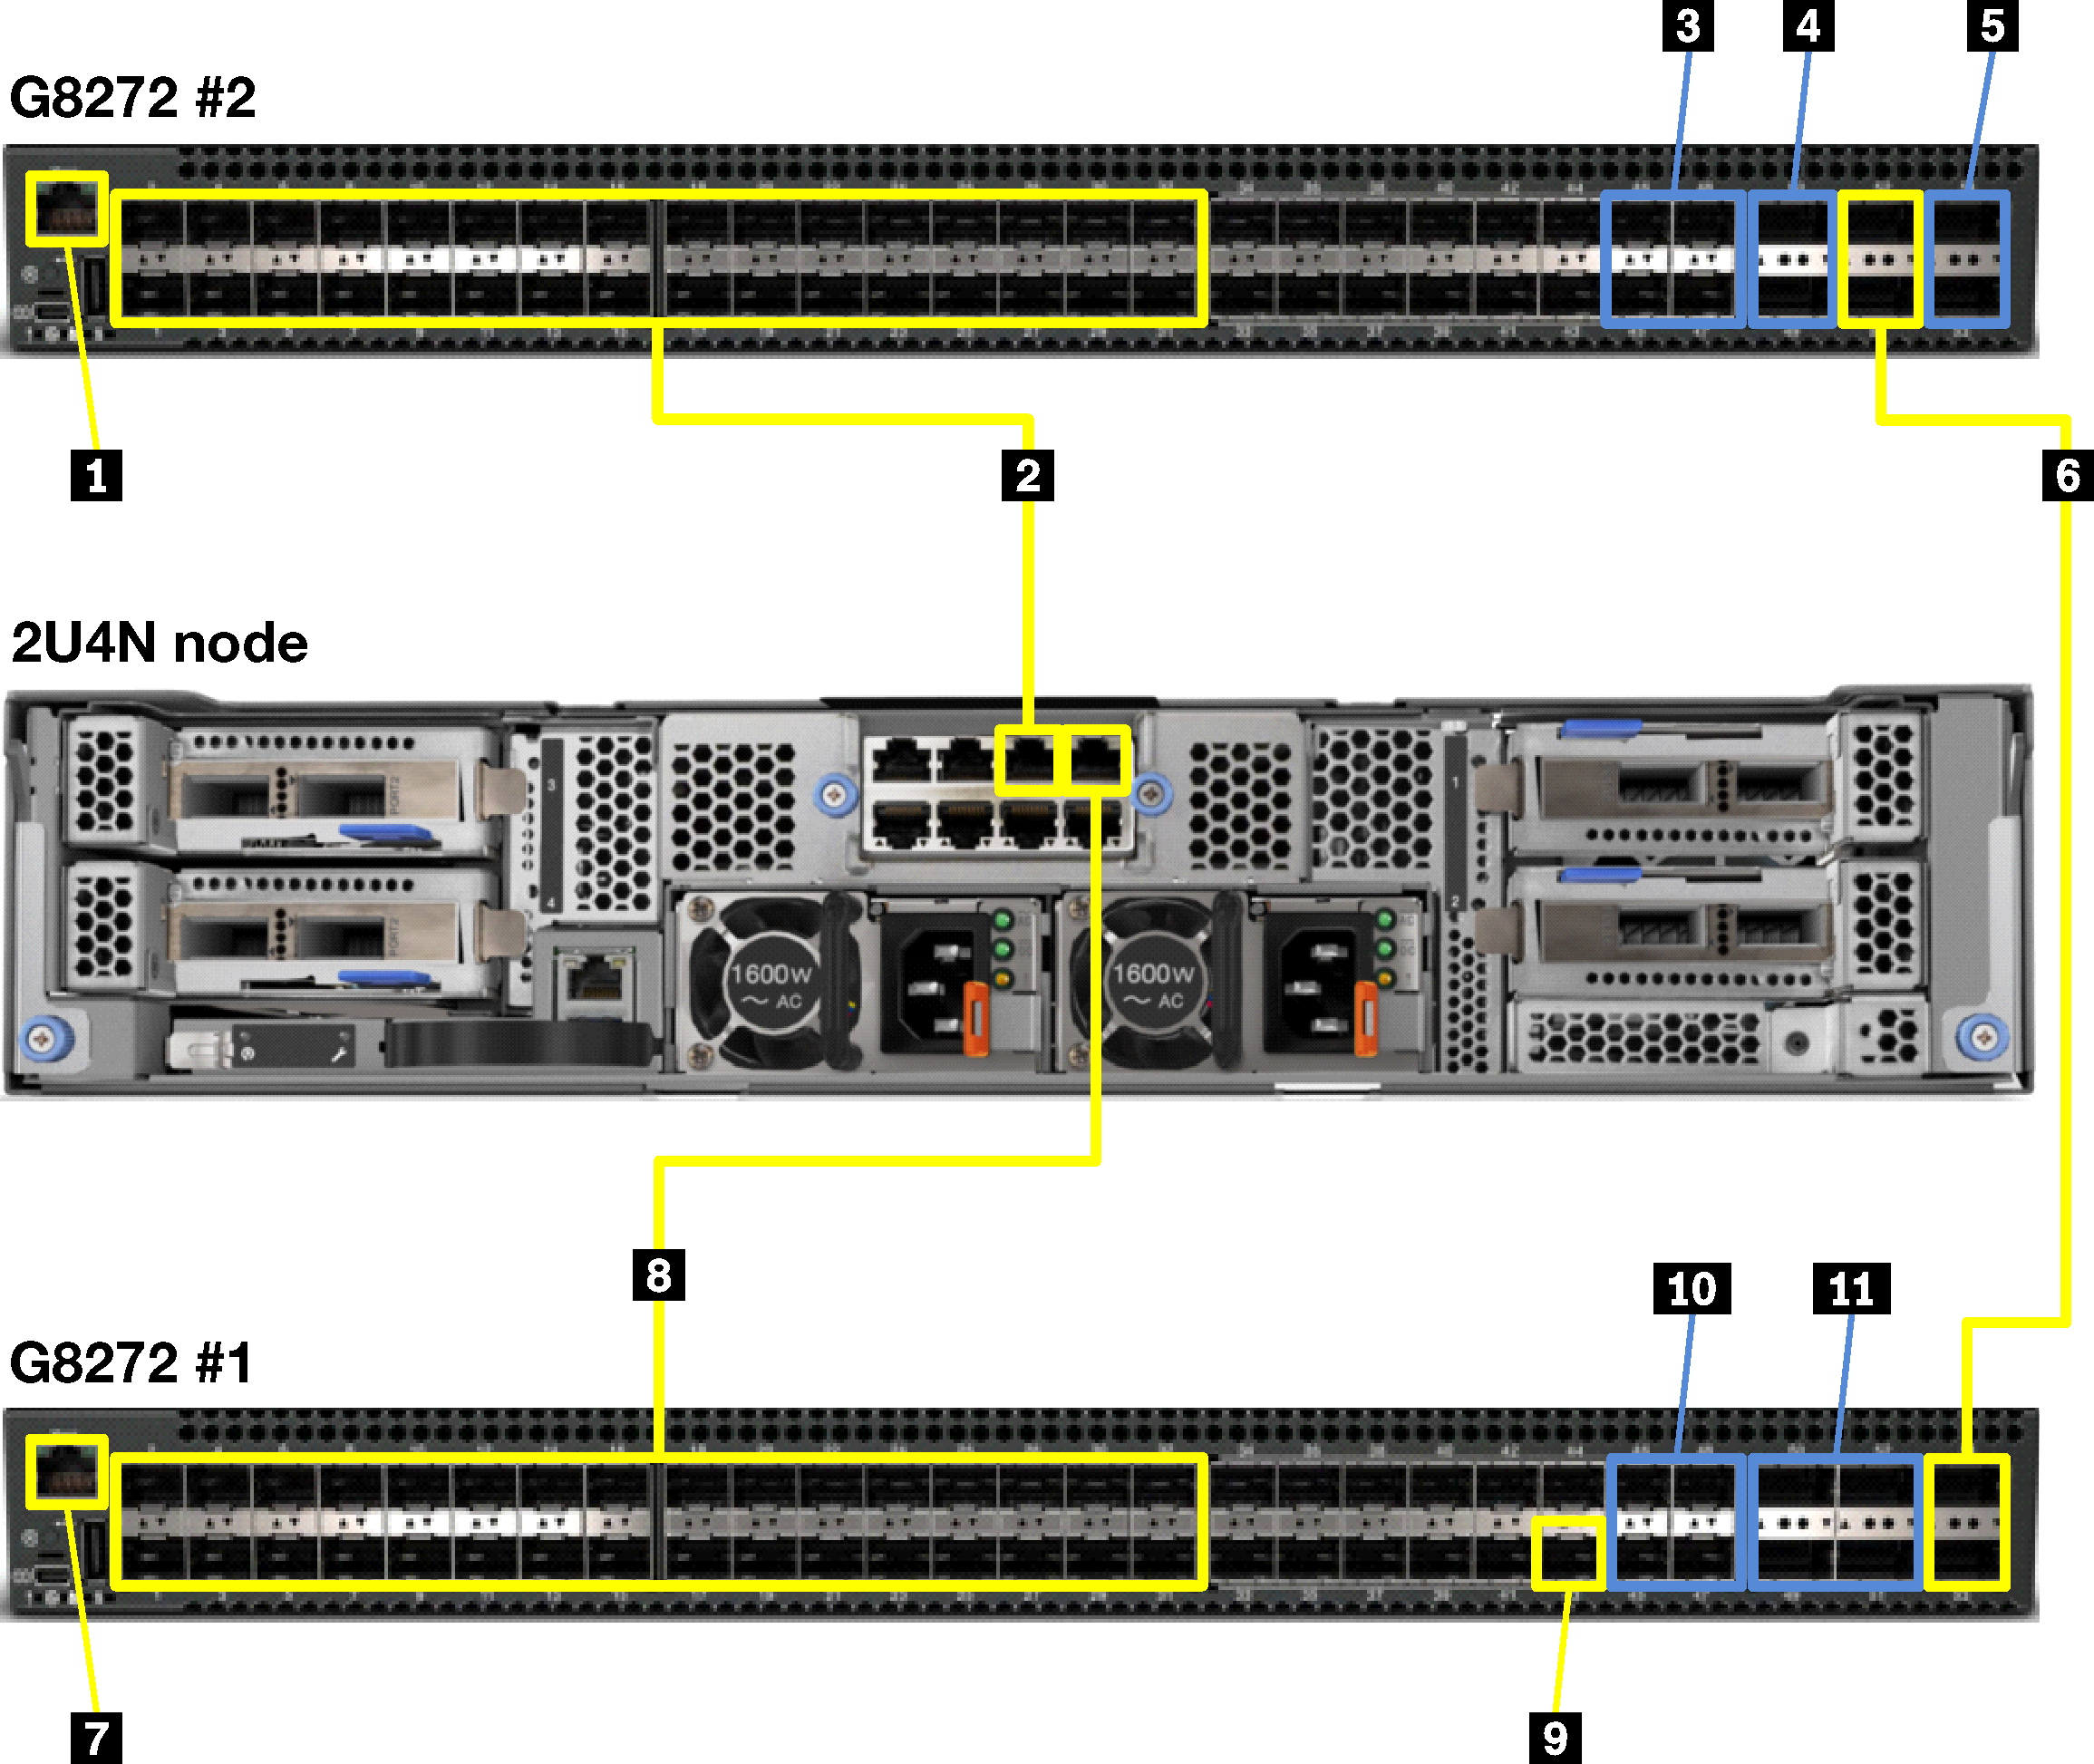 Graphic showing RackSwitch G8272 cabling for 2U4N enclosures (SXN3000 only)